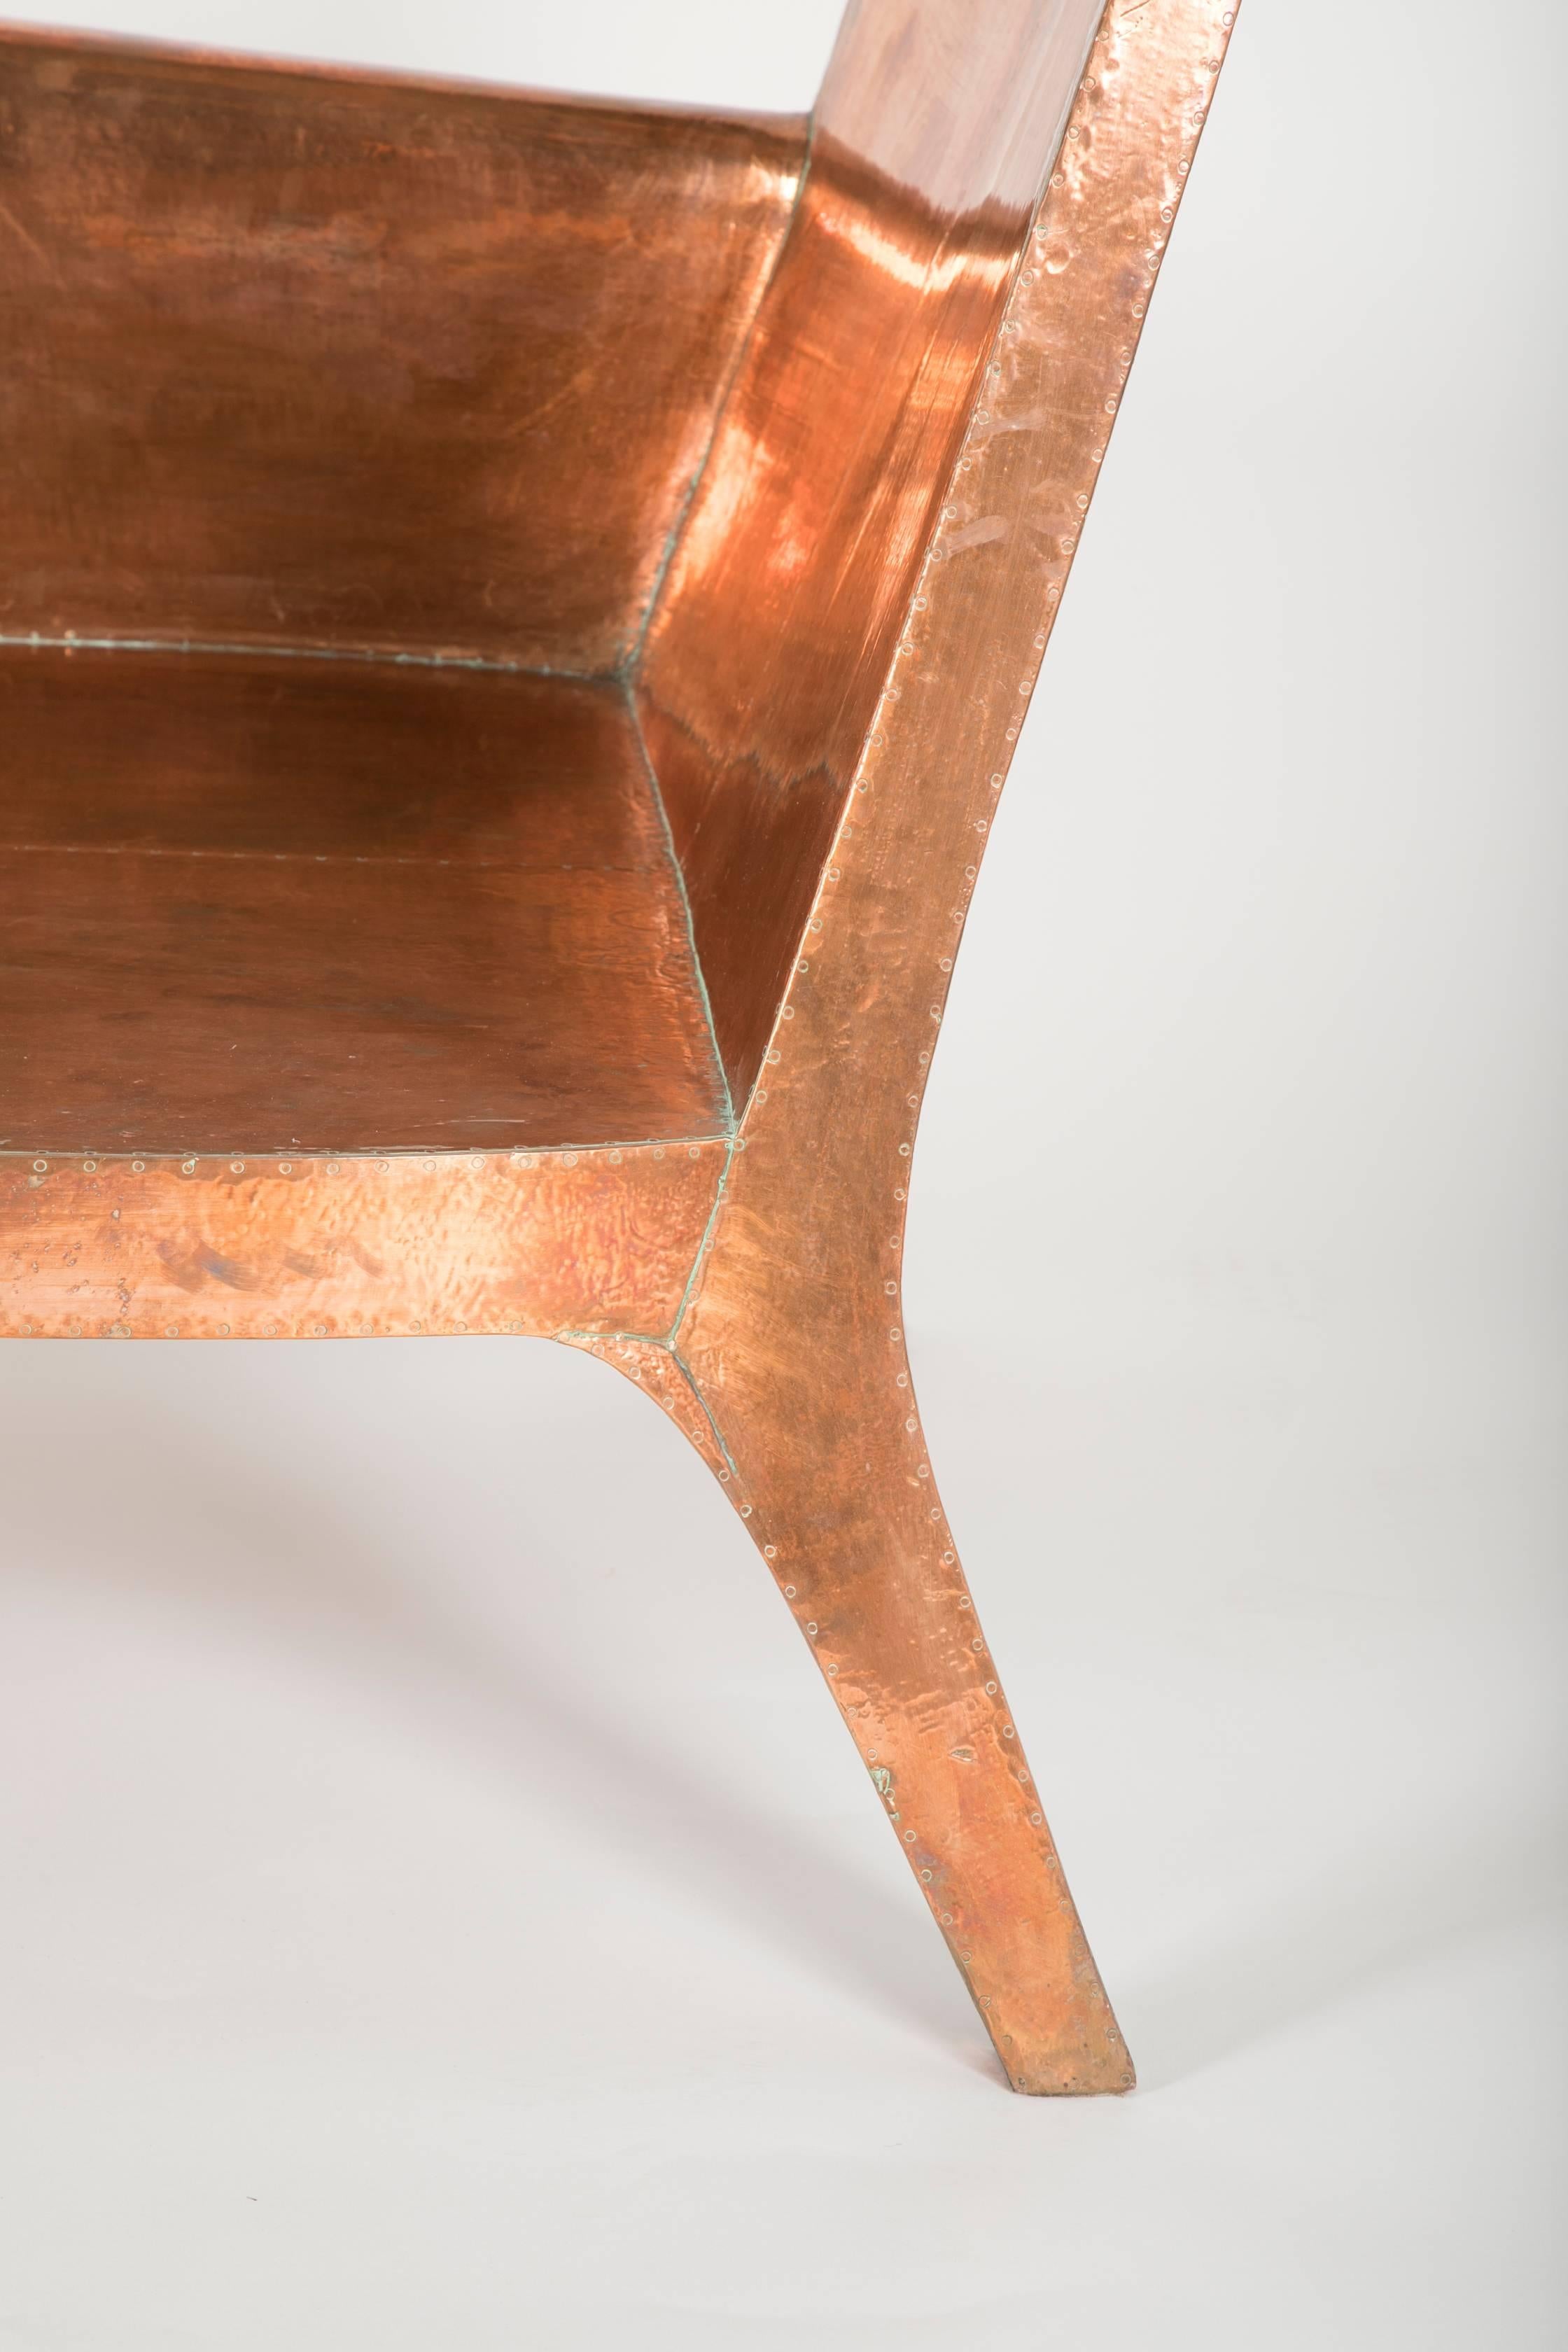 Copper Clad Chaise Designed by Paul Mathieu for Stephanie Odegard Co. Ltd.  4